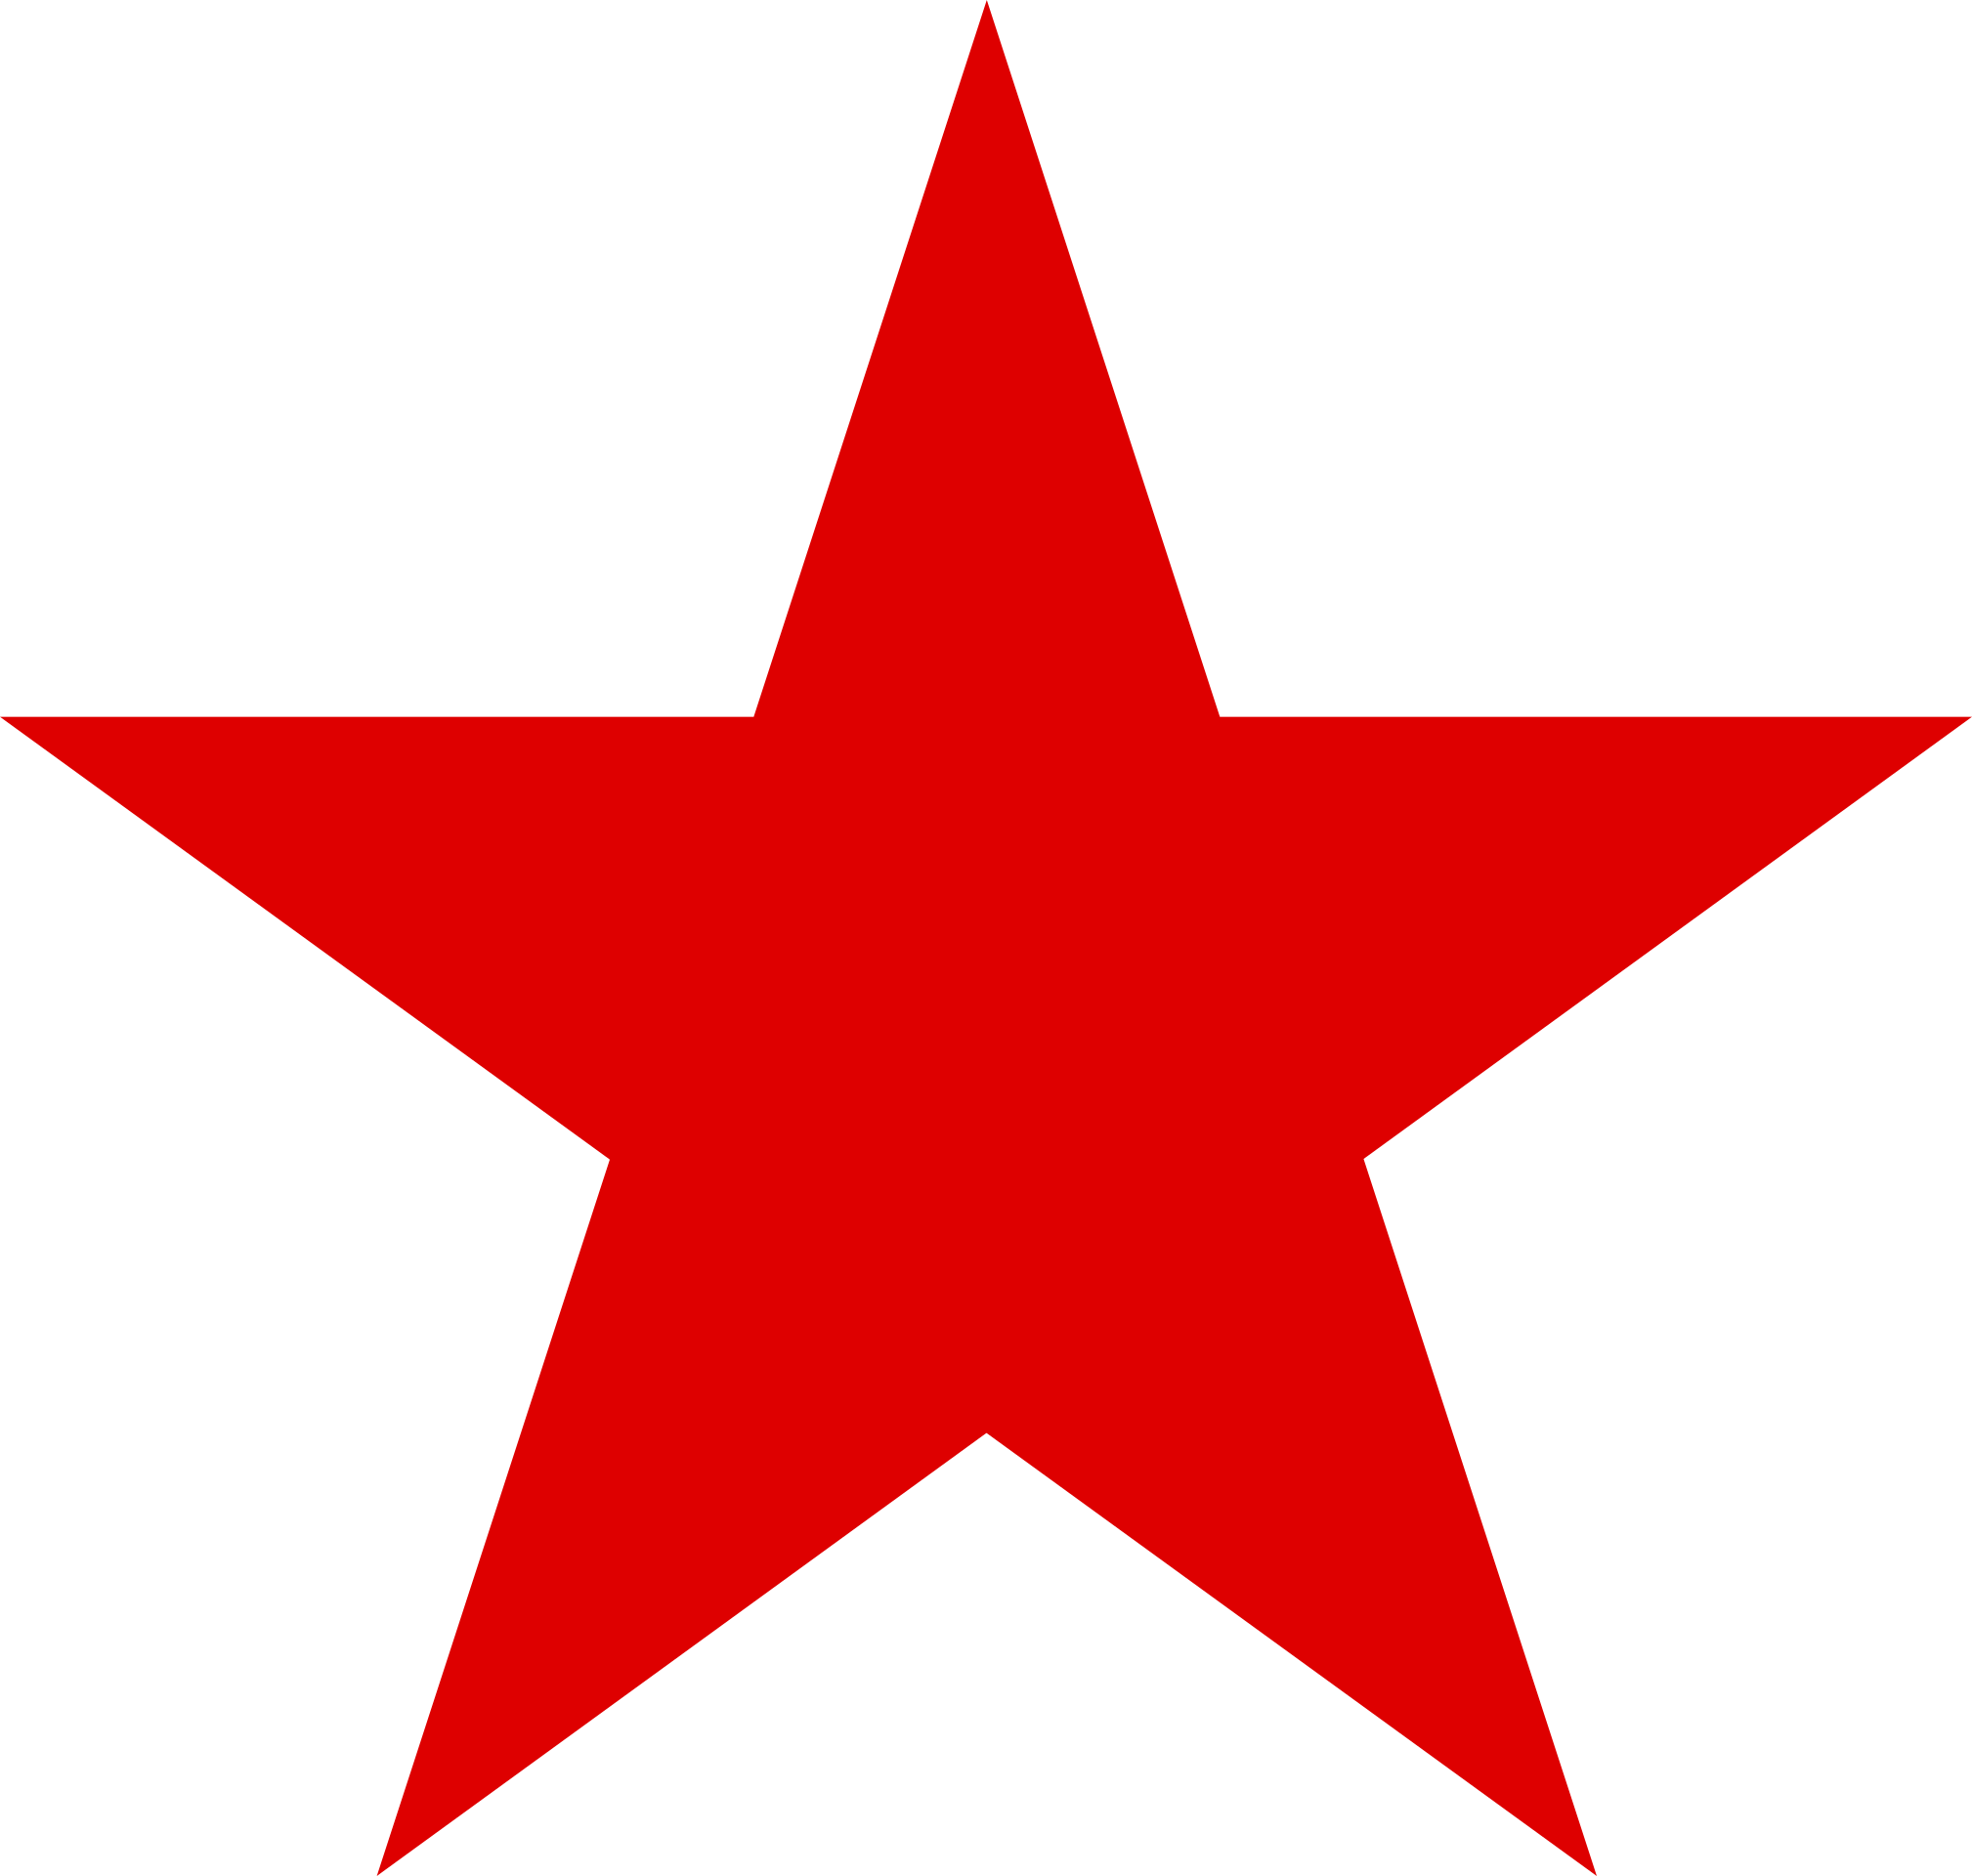 Macy's Red Star Logo - The Shiny Bright Red Holiday Star Brand(s) | DuetsBlog